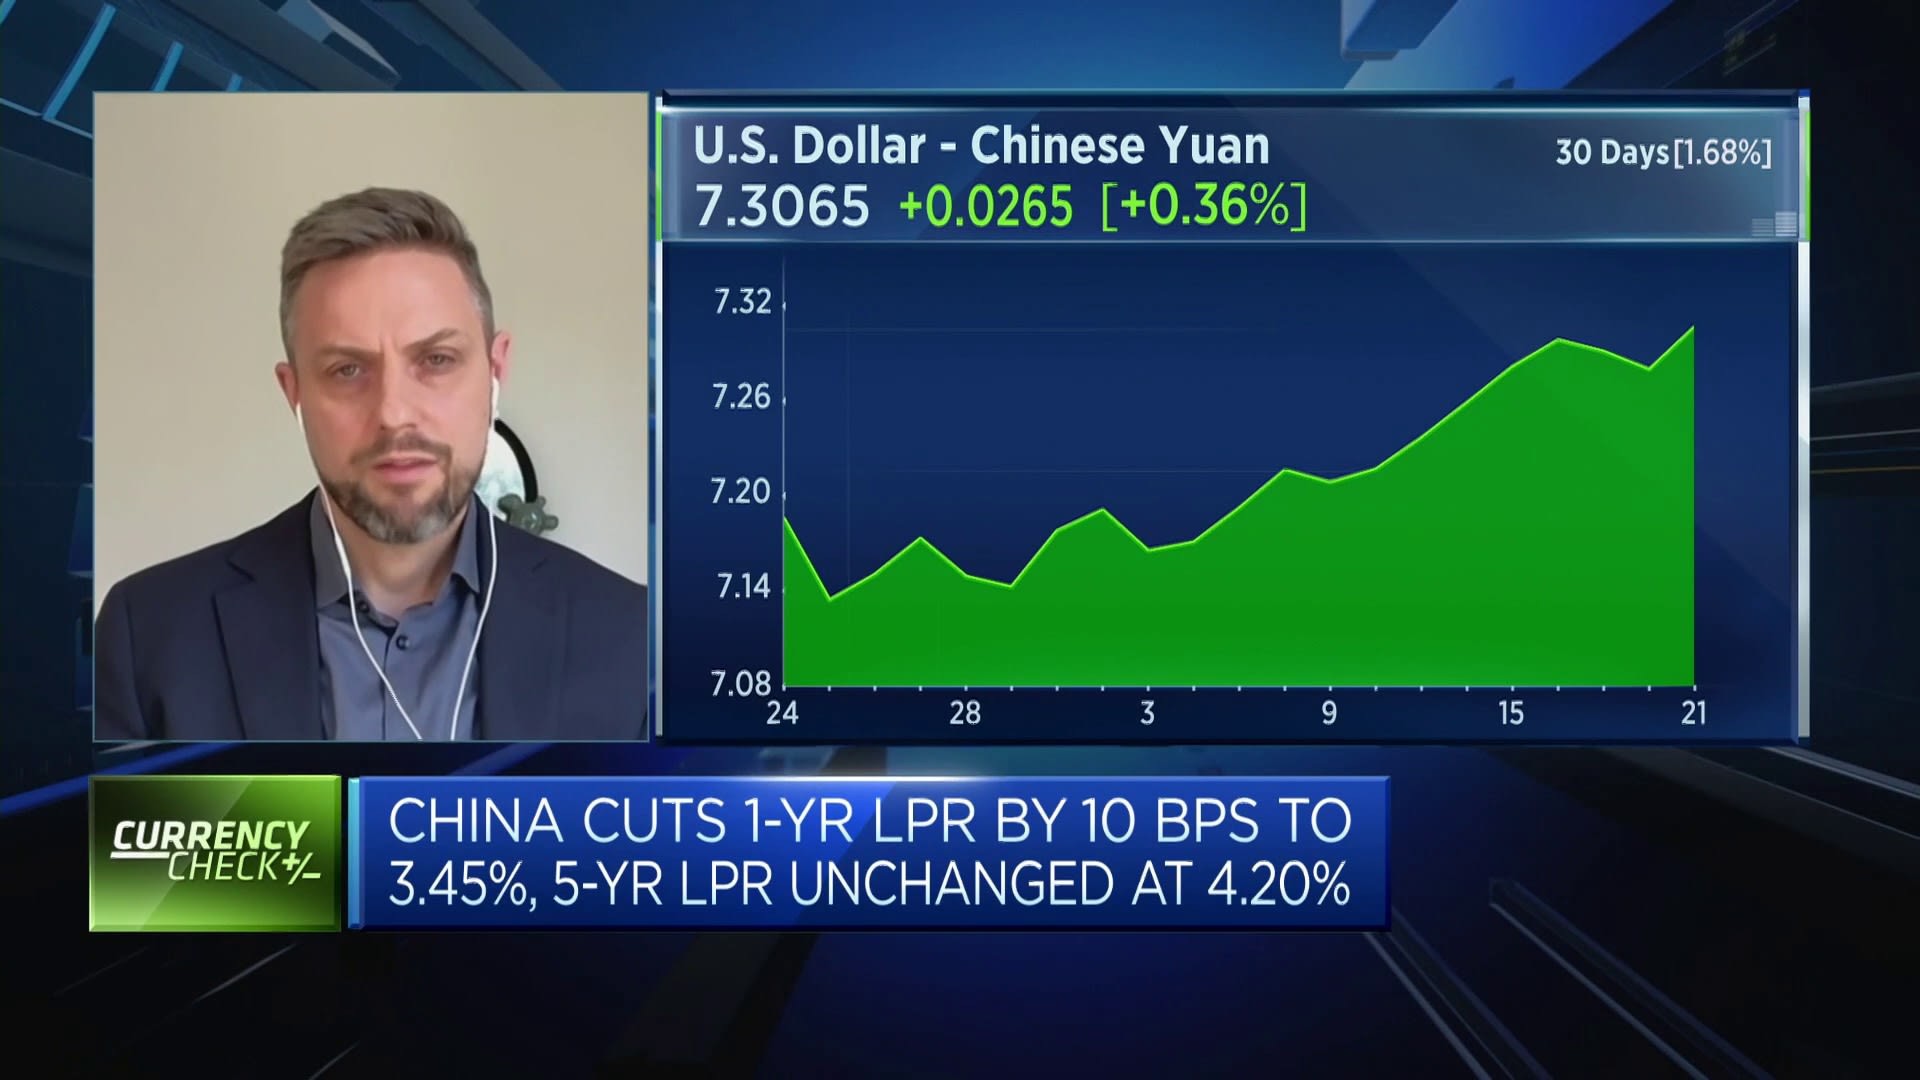 Expect a weaker yuan amidst China's underwhelming policy response: Deutsche Bank